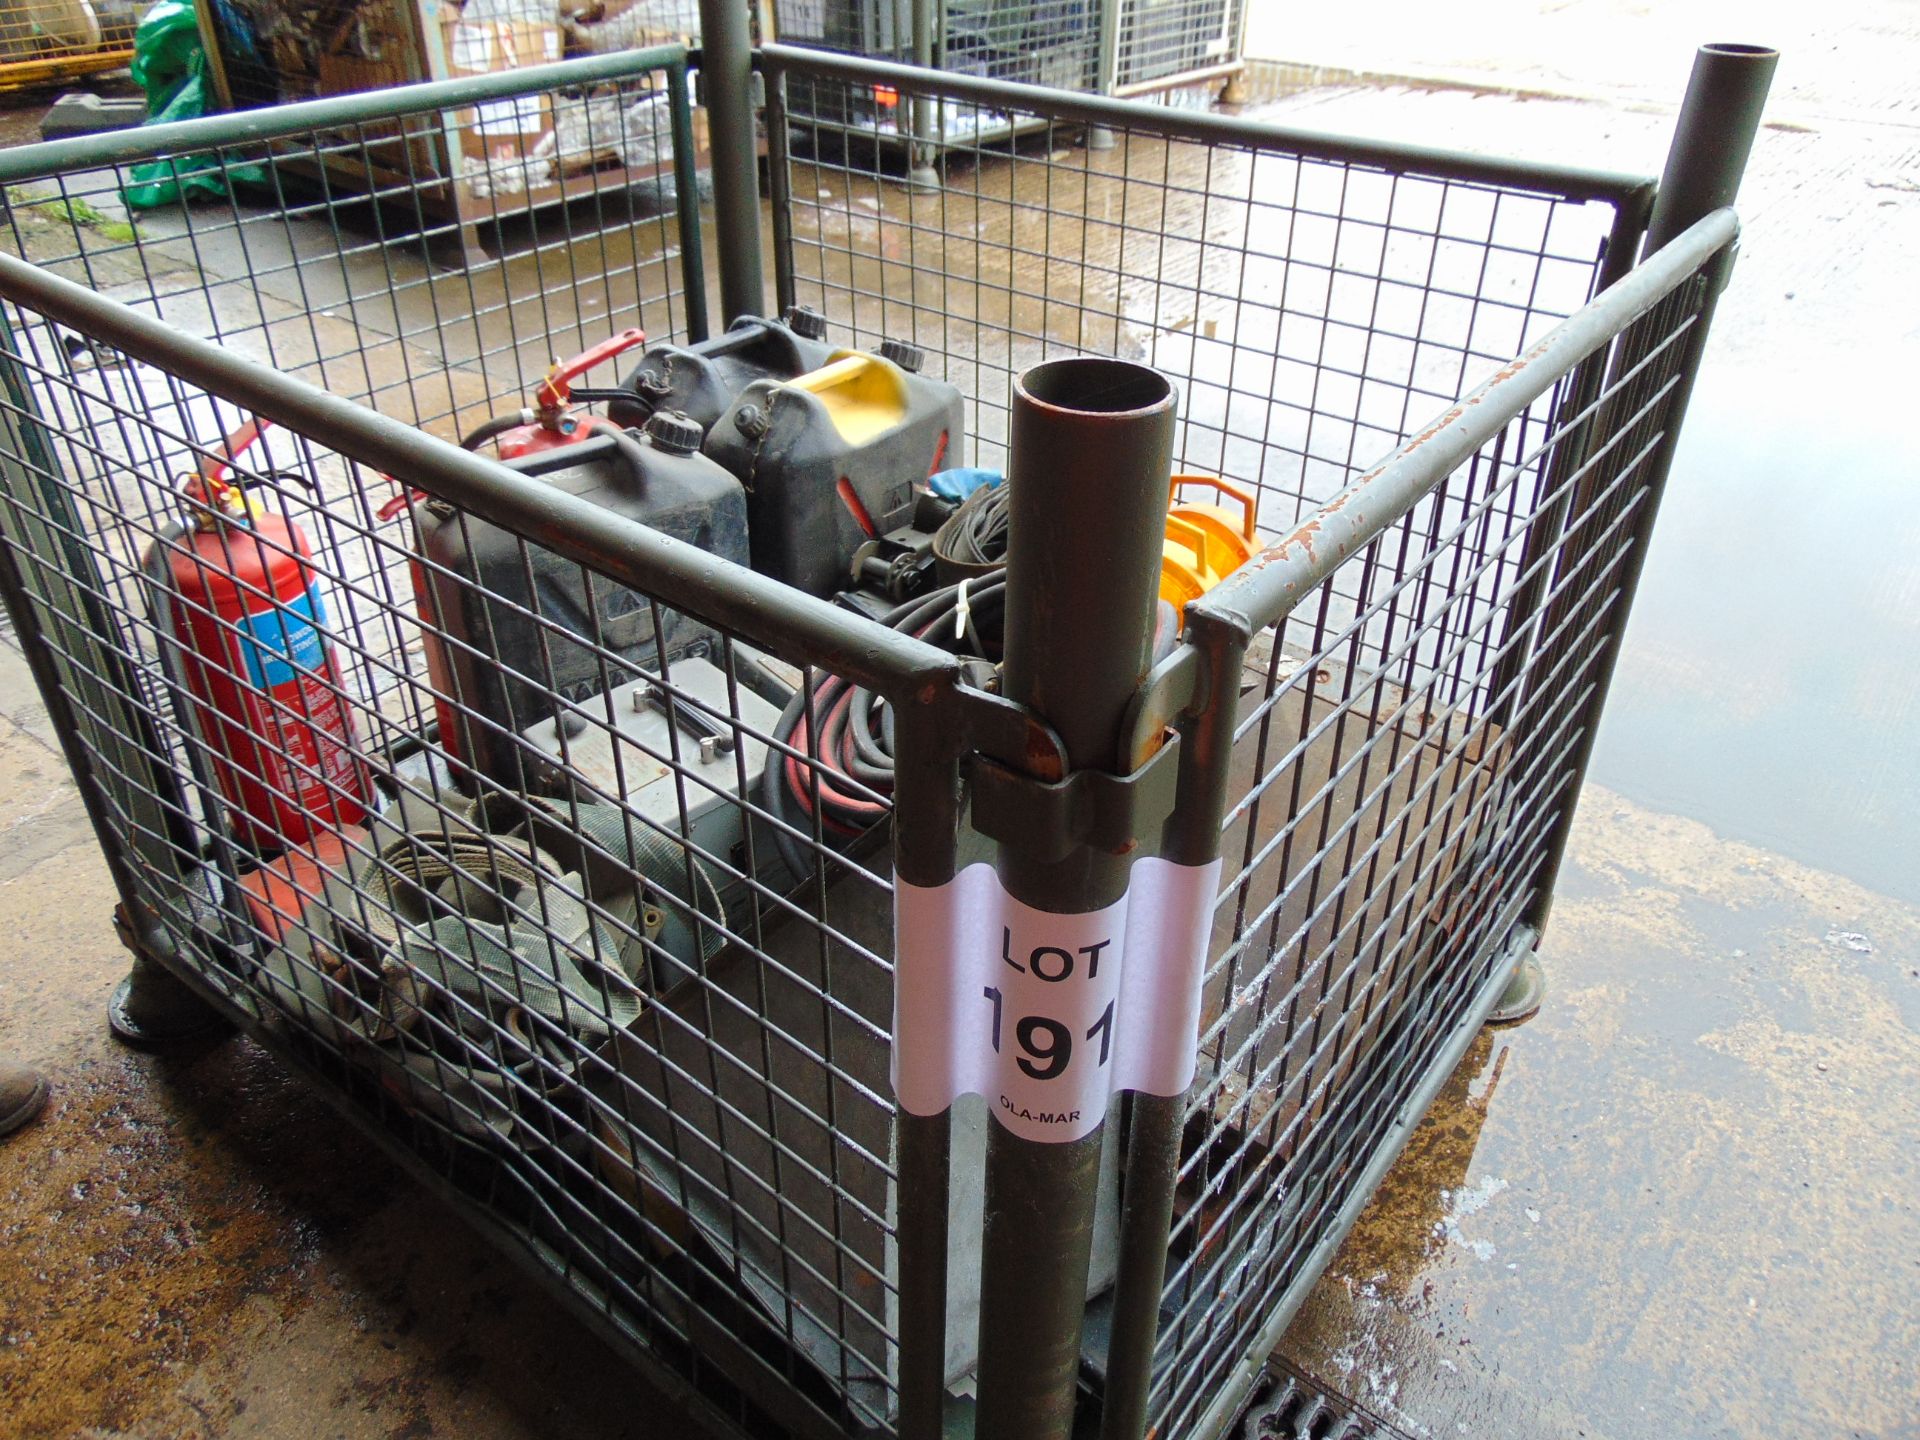 1 x Stillage Air Lines Wheel Chocks, Jerry Cans, Cooking Vessels, Ratchet Straps, Fire Extinguisher - Image 6 of 6